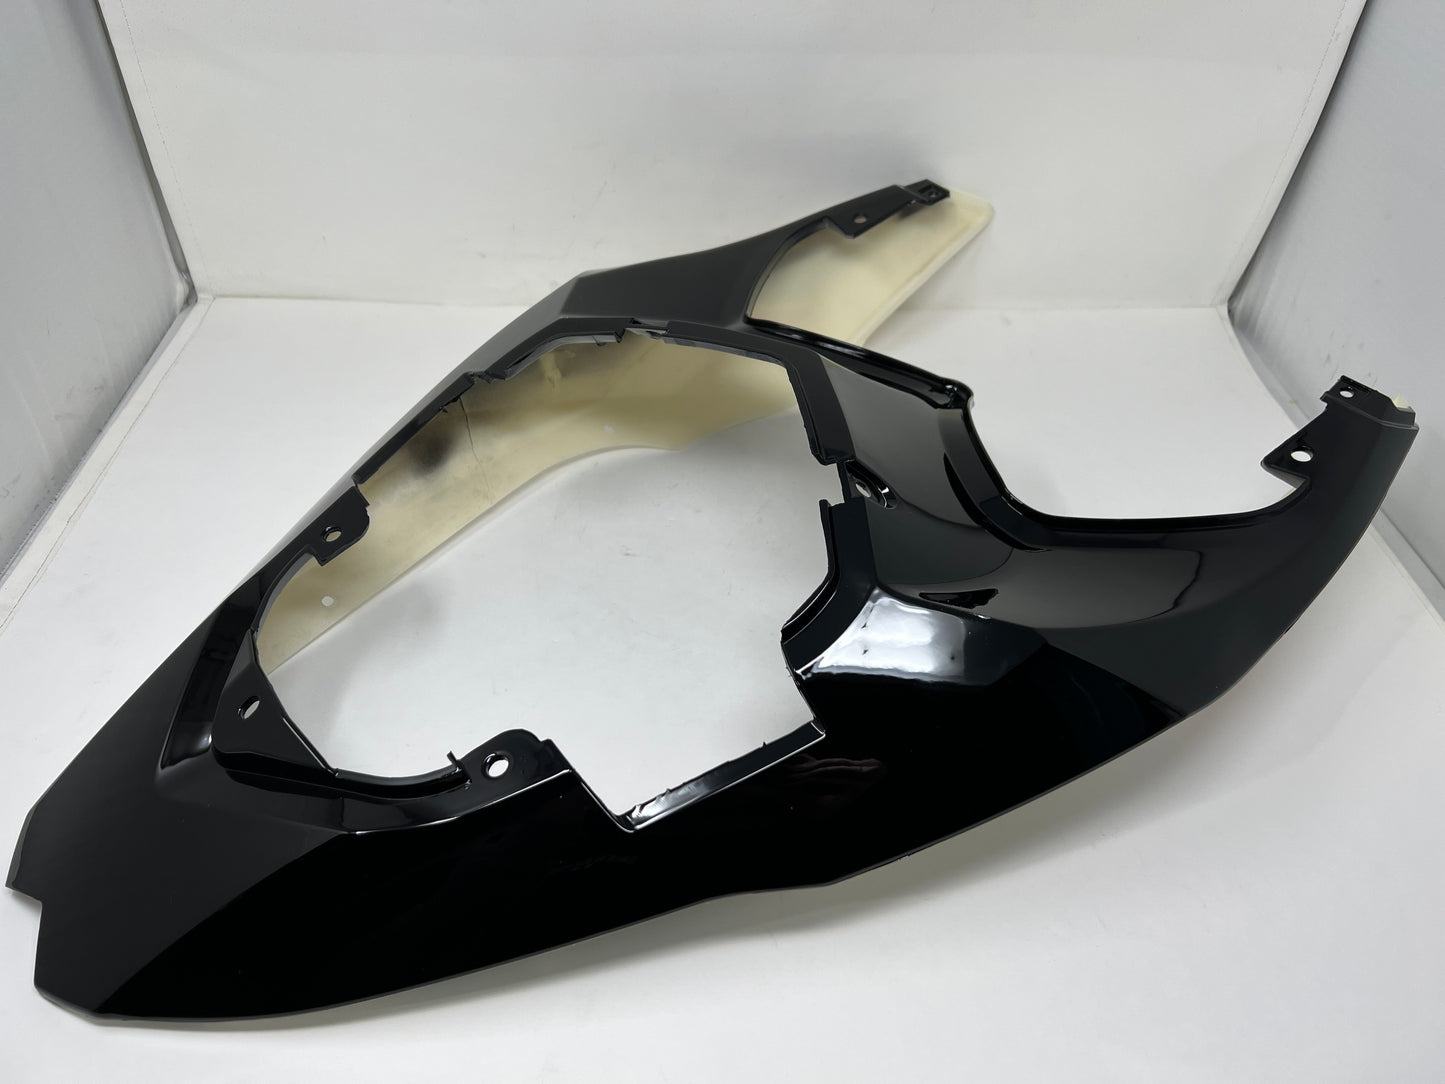 Rear tail fairing for DF250RTS for sale. Buy rear seat plastic for Venom X22R